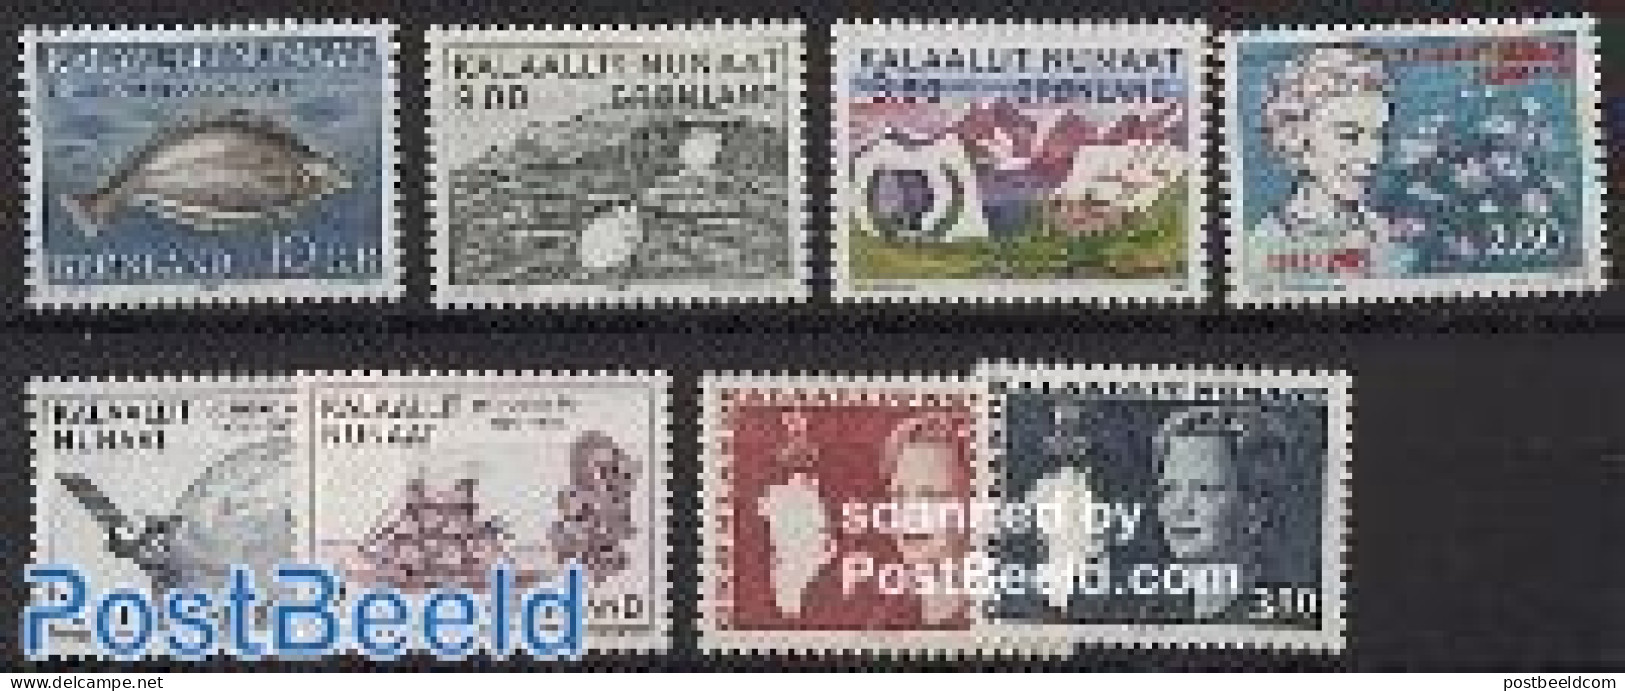 Greenland 1985 Yearset 1985 (8v), Mint NH, Various - Yearsets (by Country) - Ongebruikt